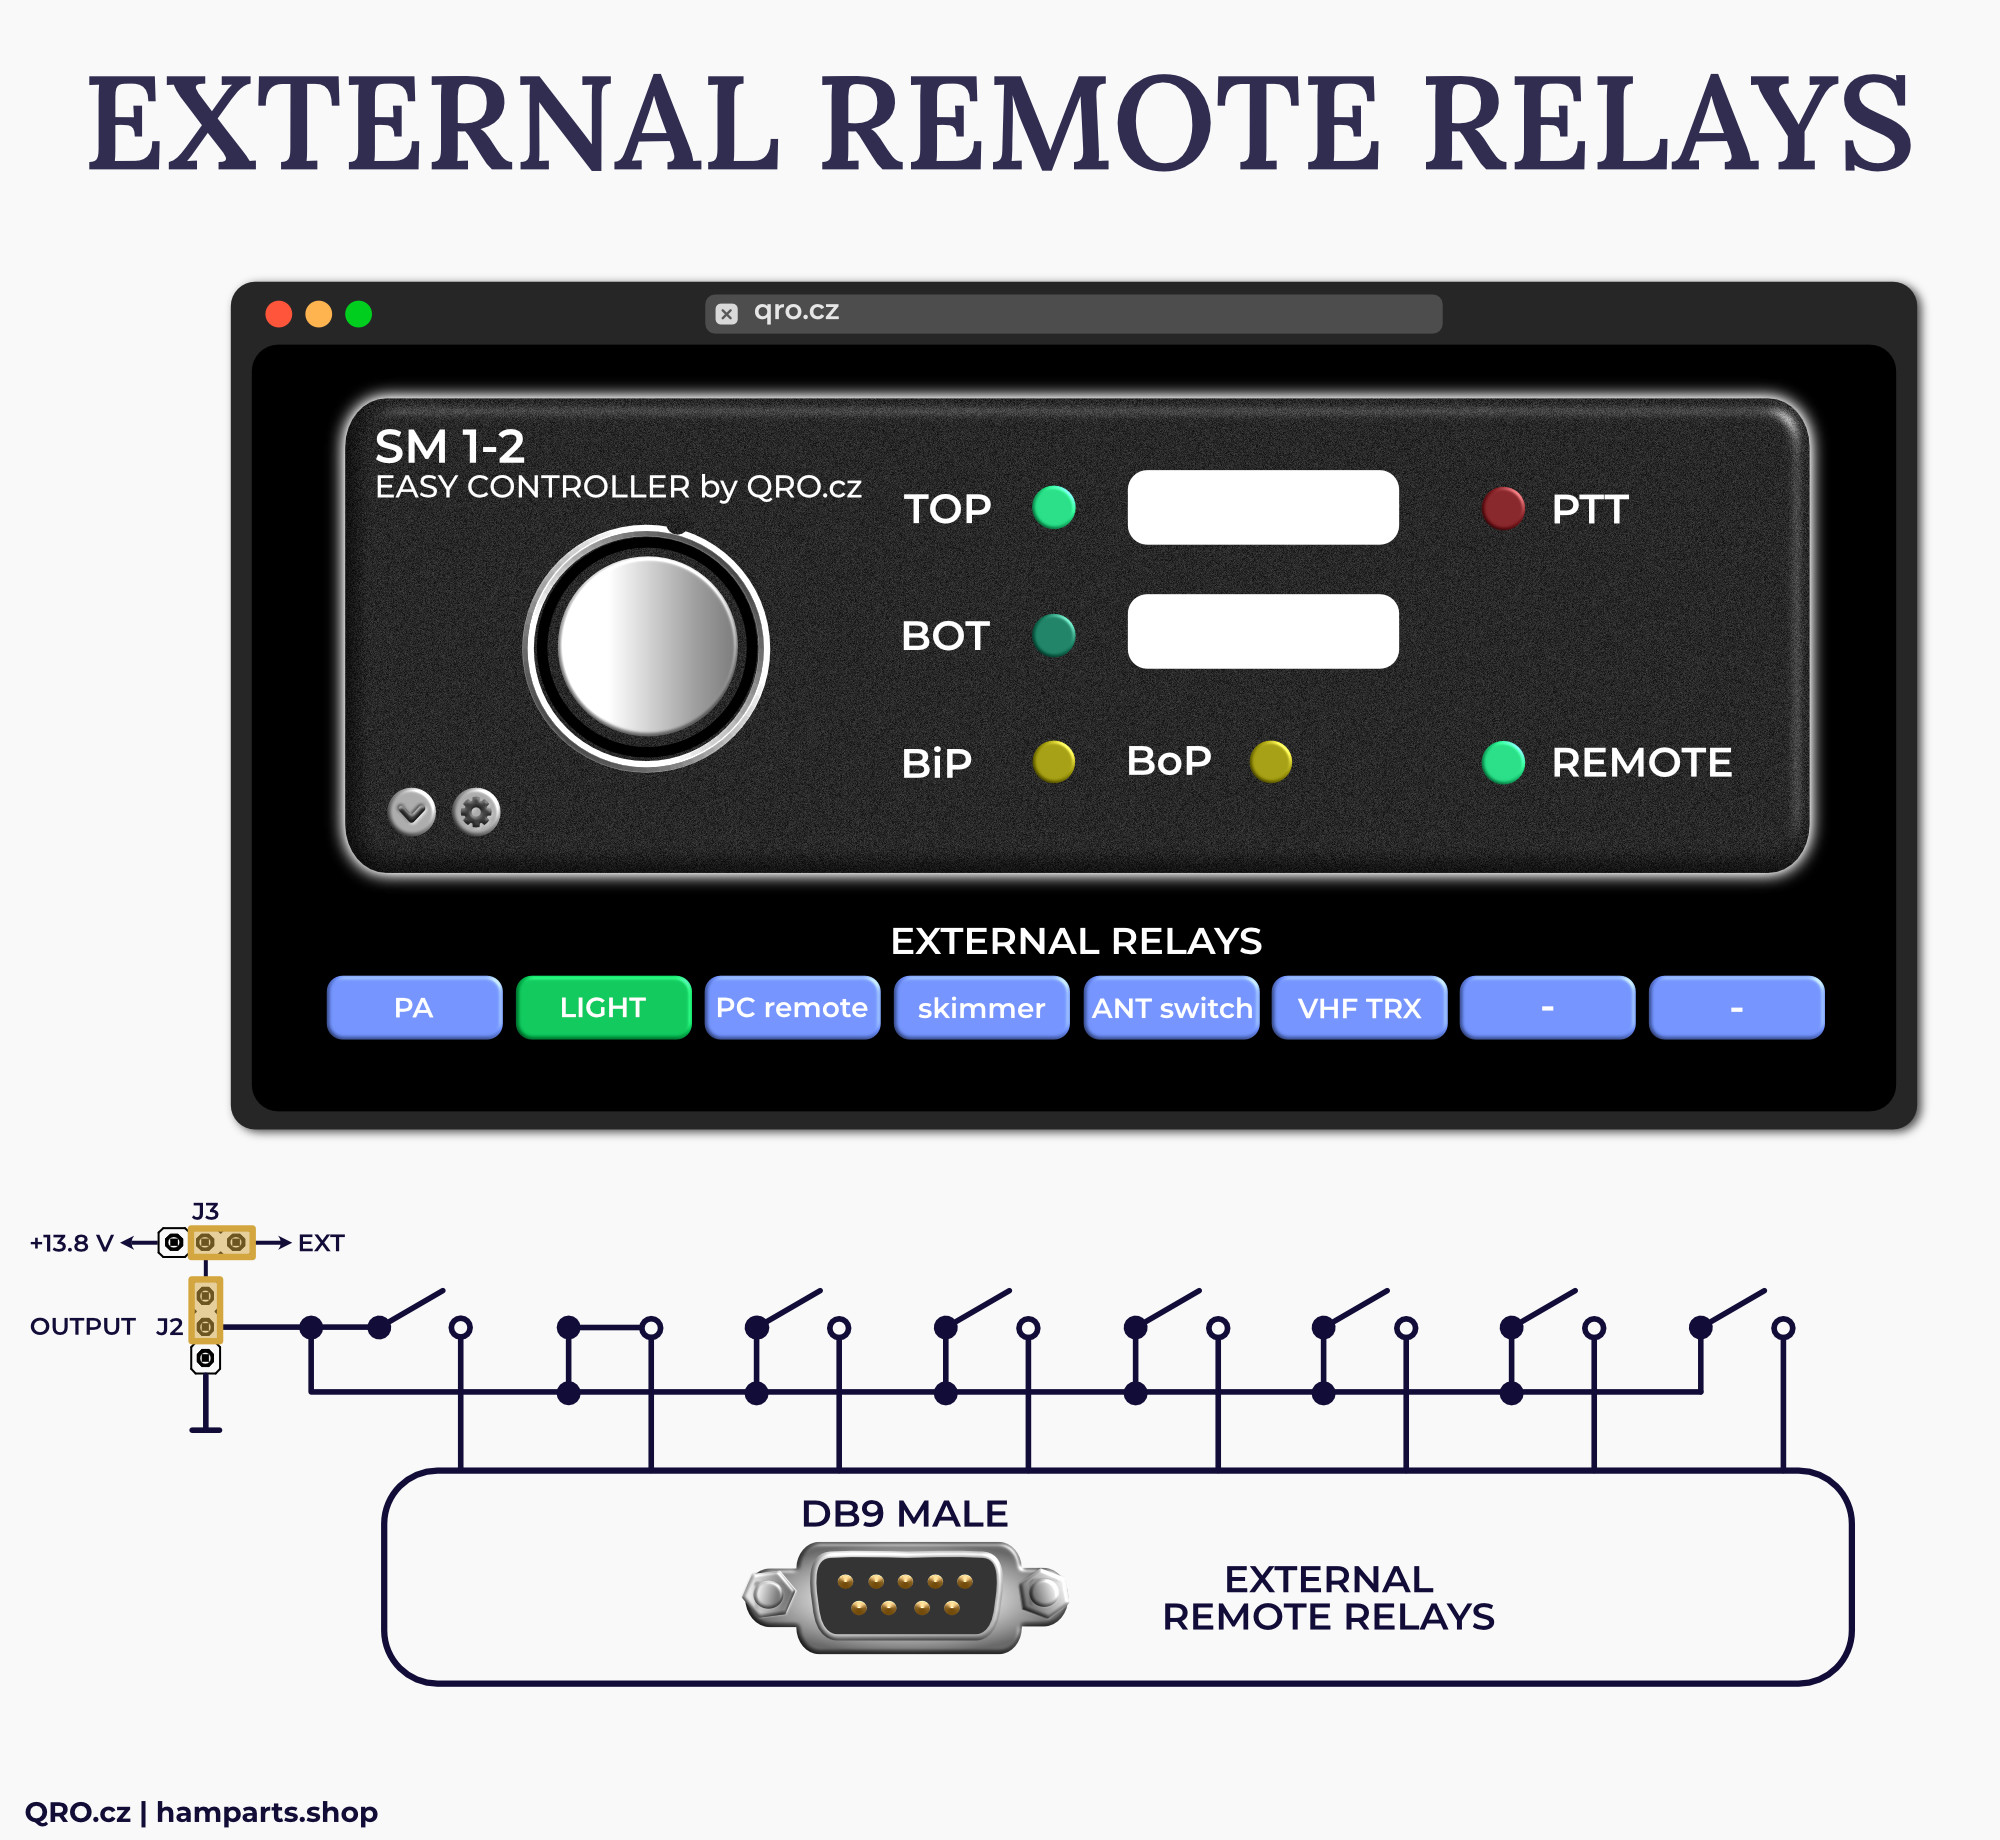 easy controller for stack match 1-2 example of external relays by qro.cz hamparts.shop